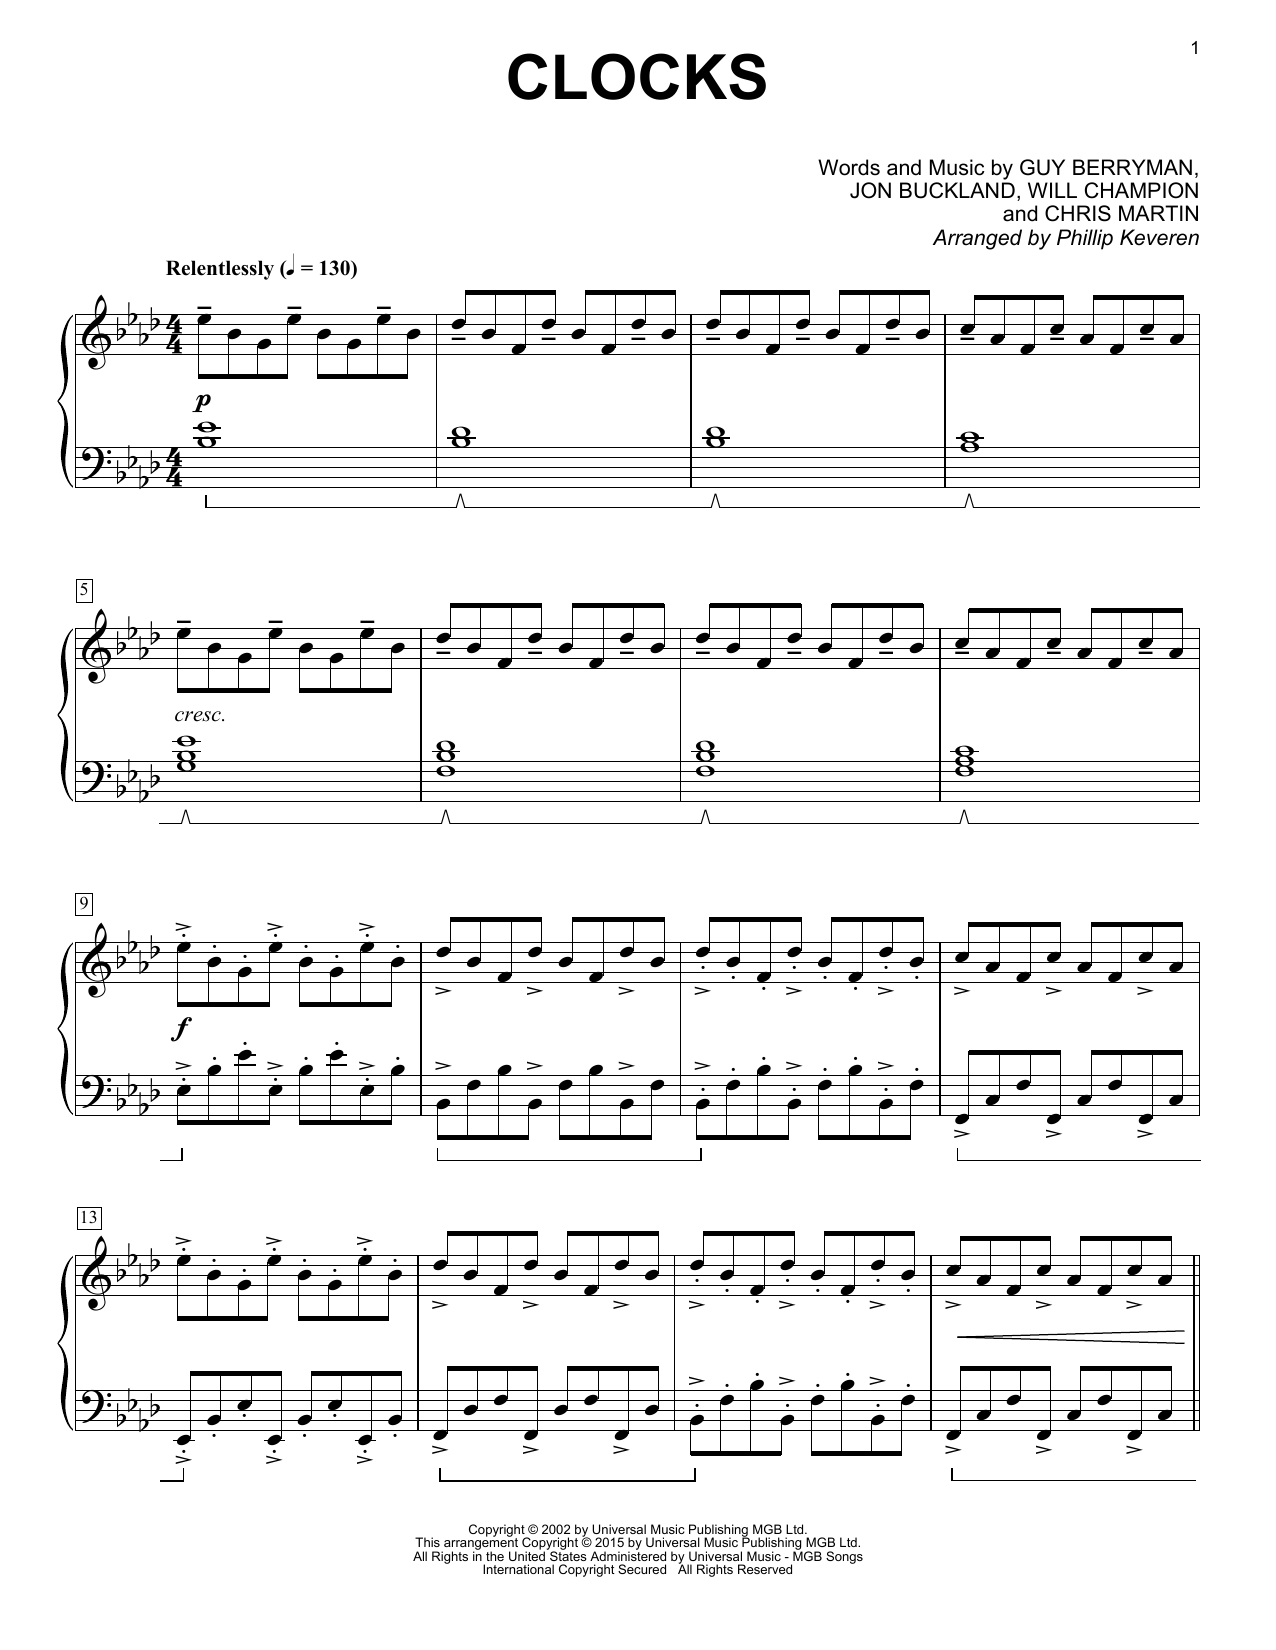 Carrie Underwood "The Champion" Sheet Music Notes, Chords | Piano